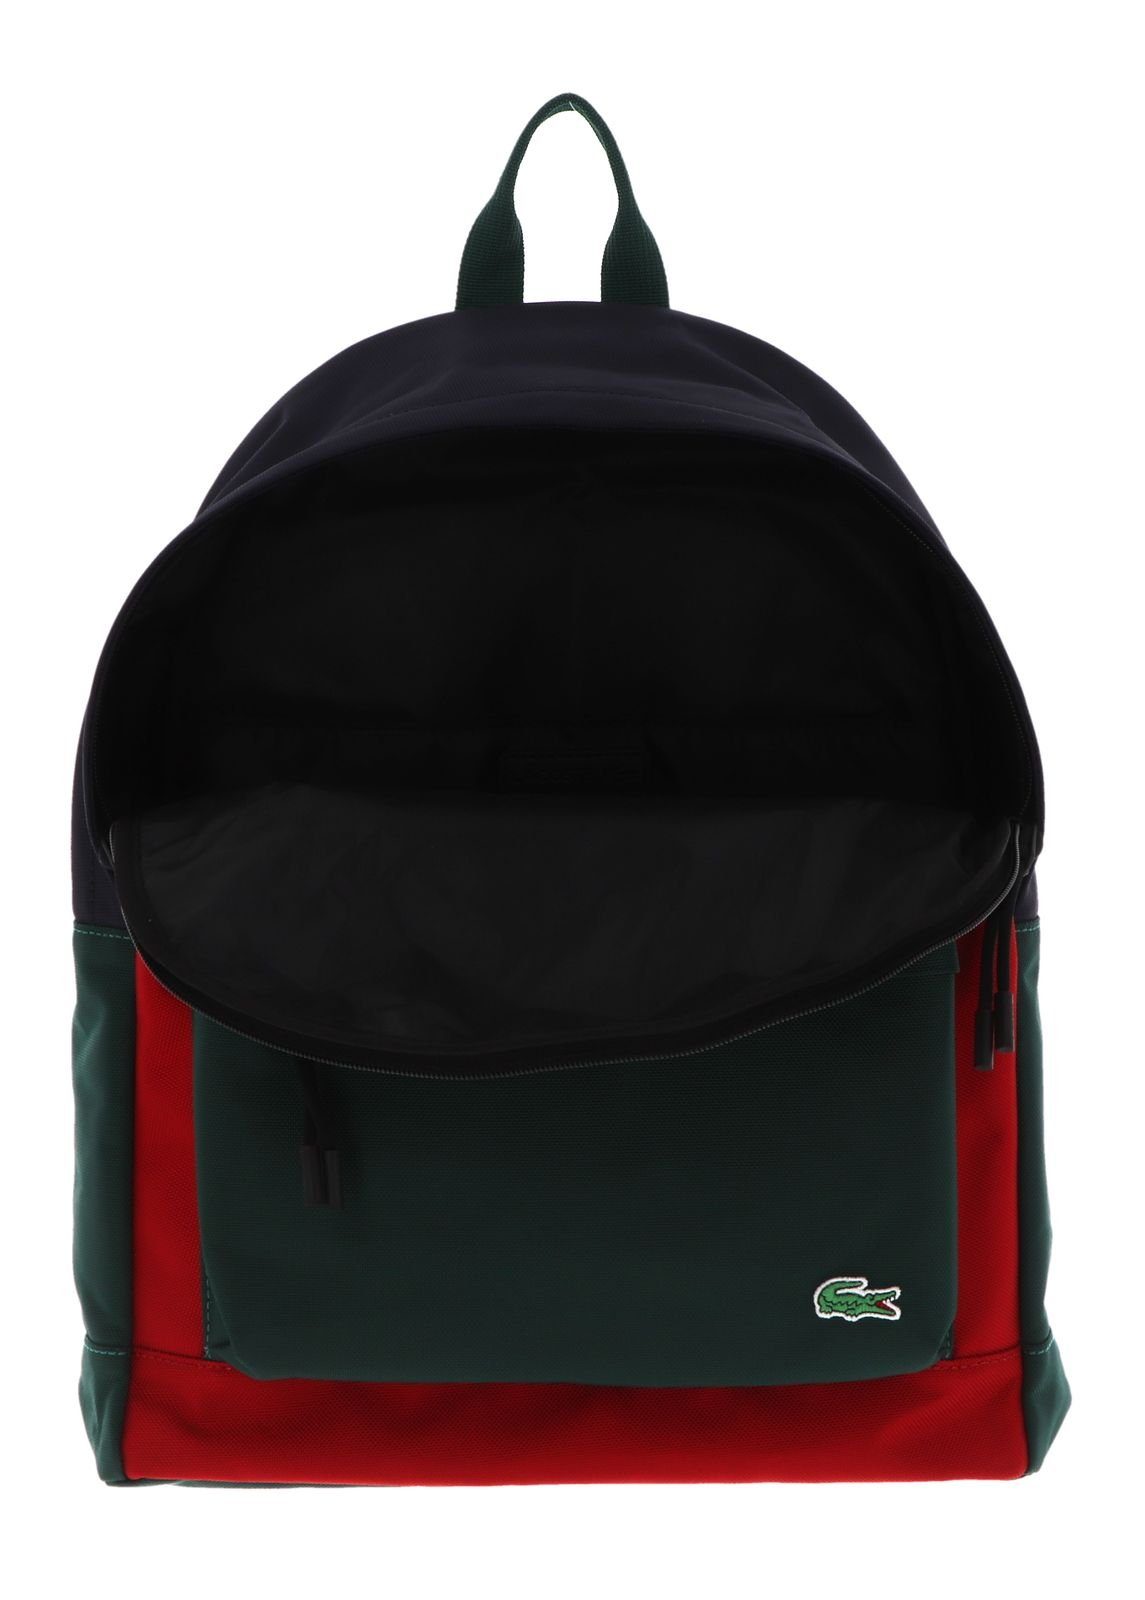 Lacoste Rucksack Holiday Abime Swing Rouge Package